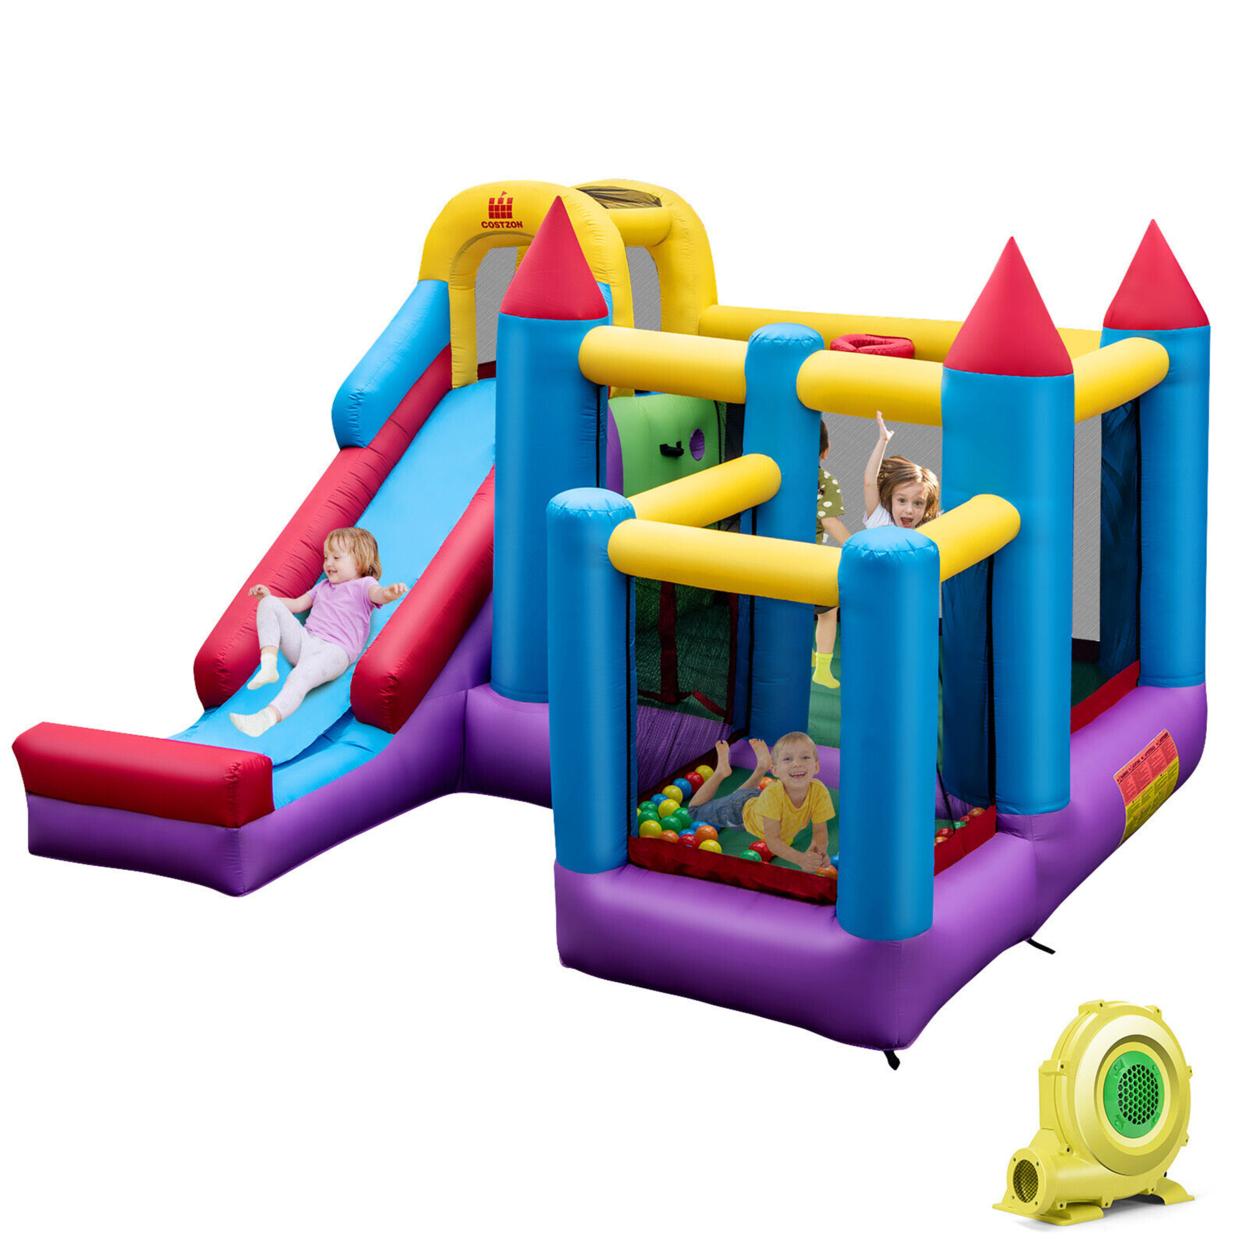 Inflatable Bounce House 5-in-1 Inflatable Bouncer Indoor&Outdoor W/ 735W Blower